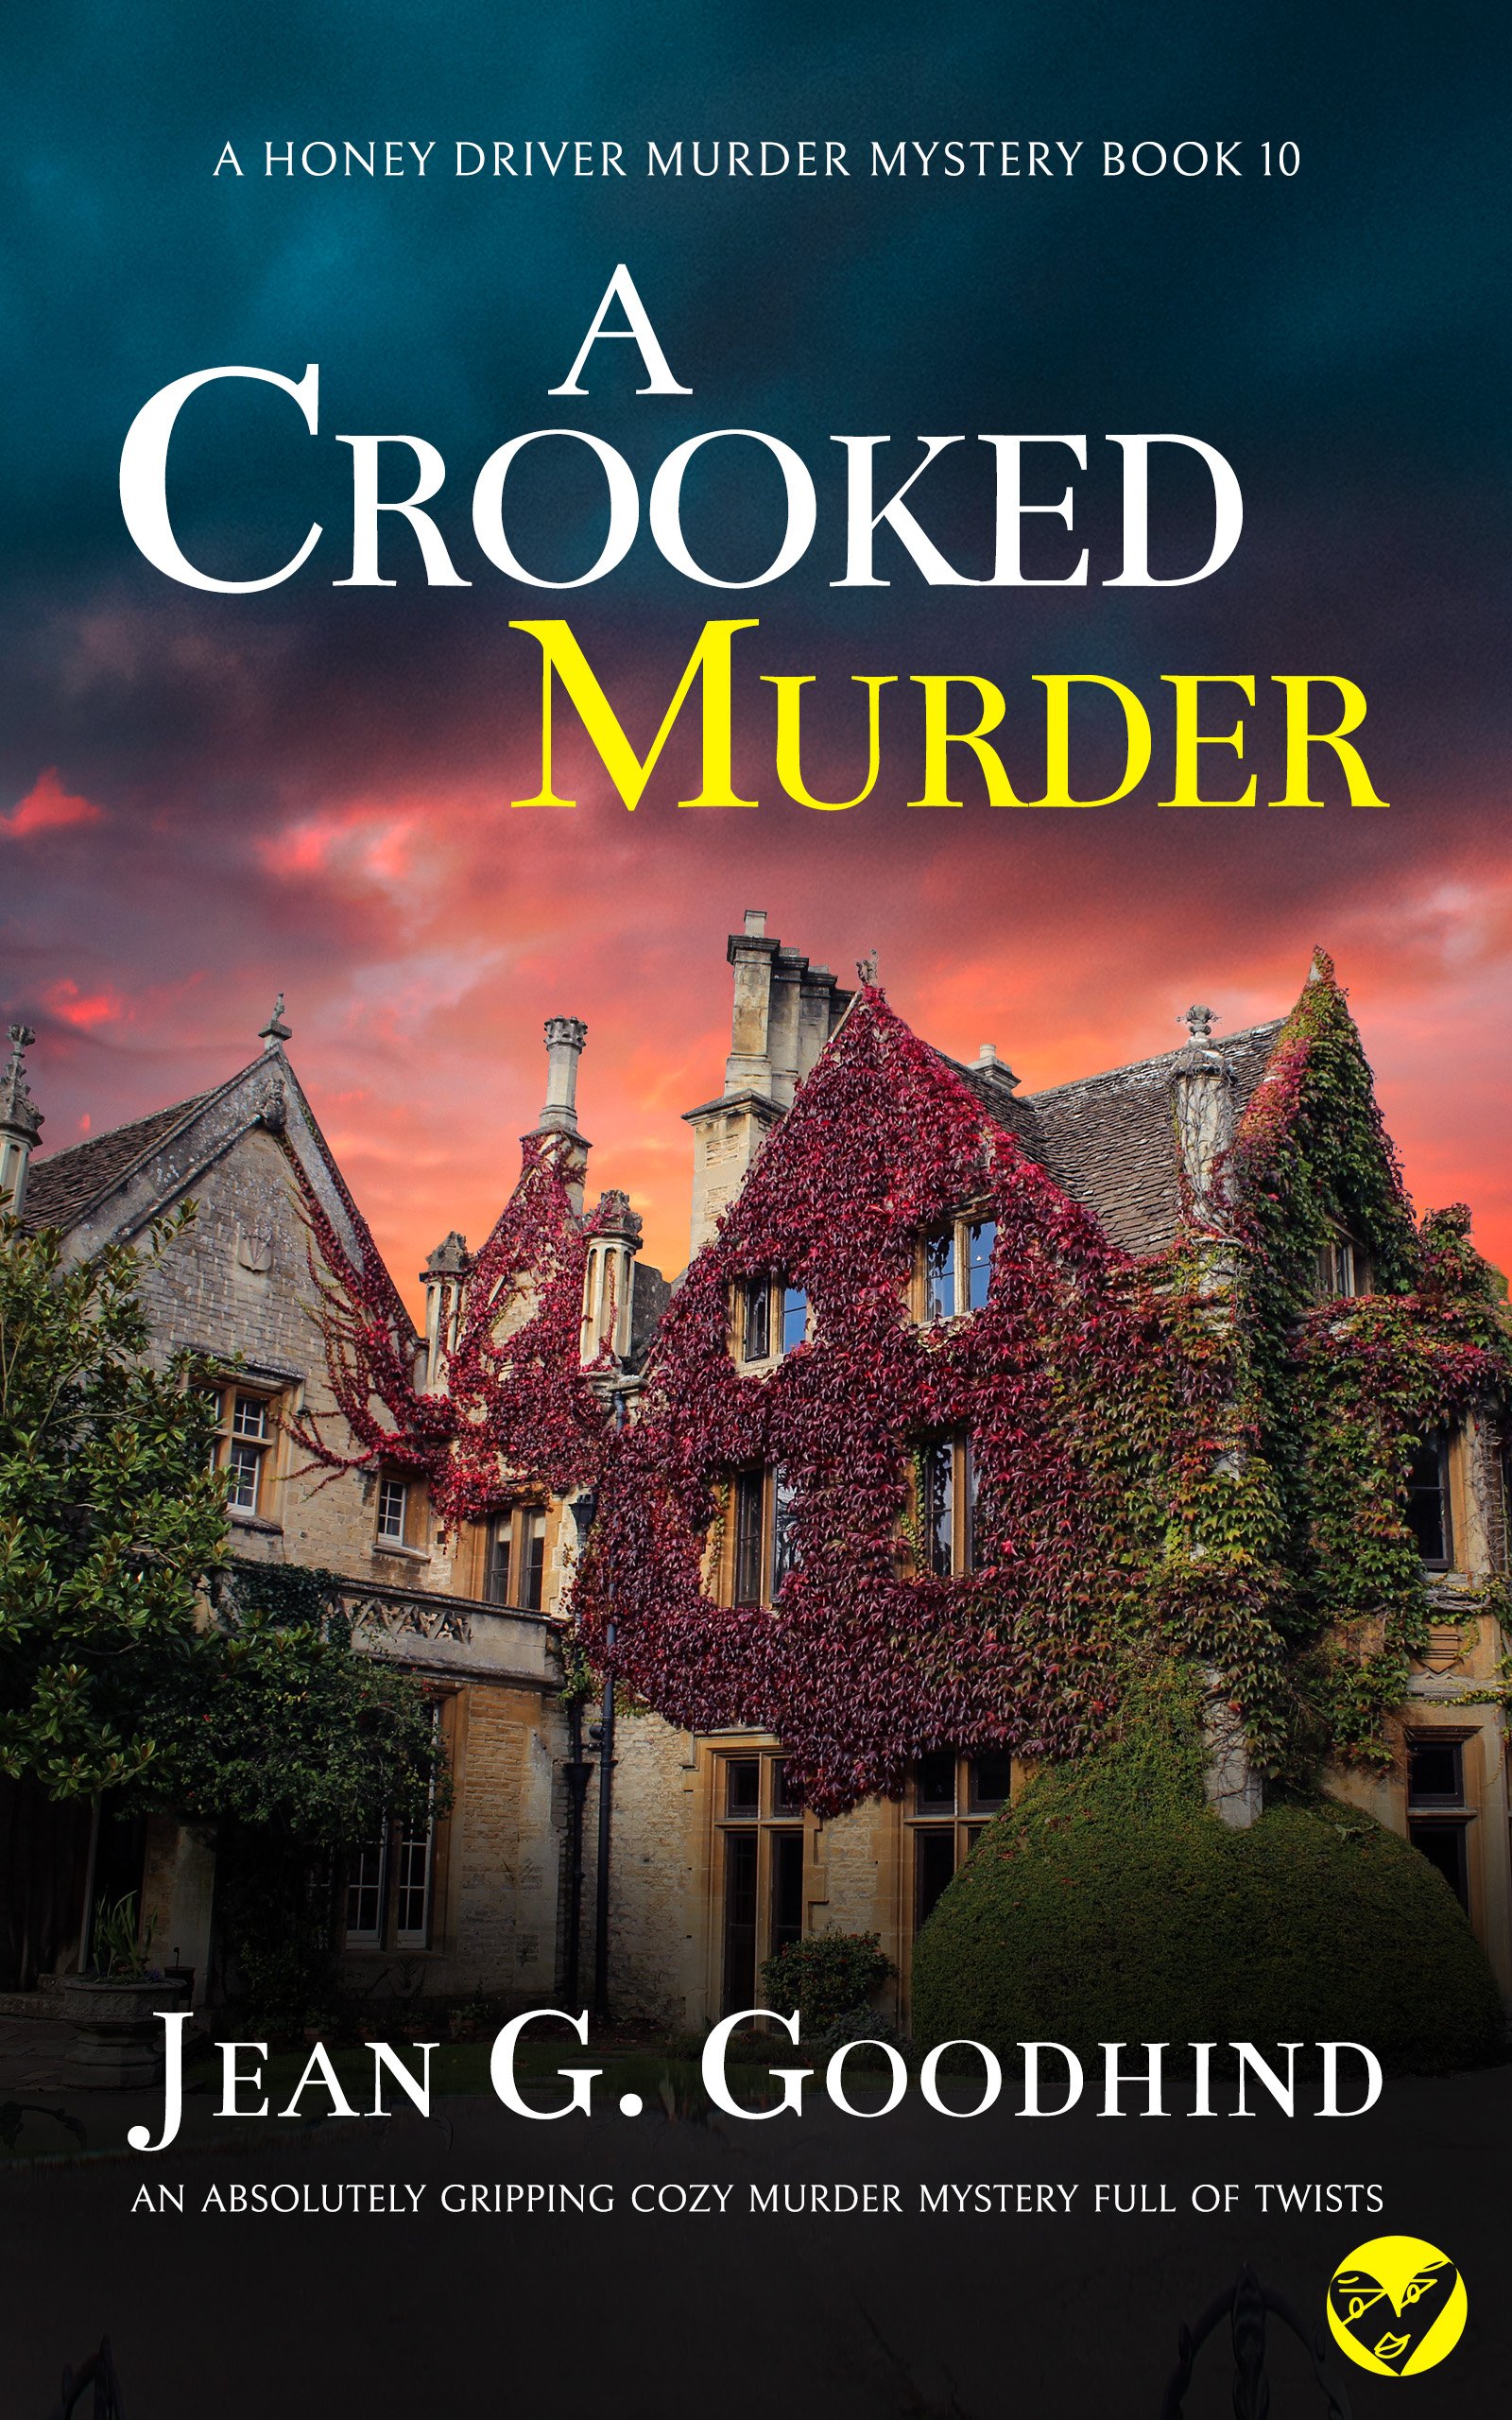 A CROOKED MURDER Cover publish.jpg